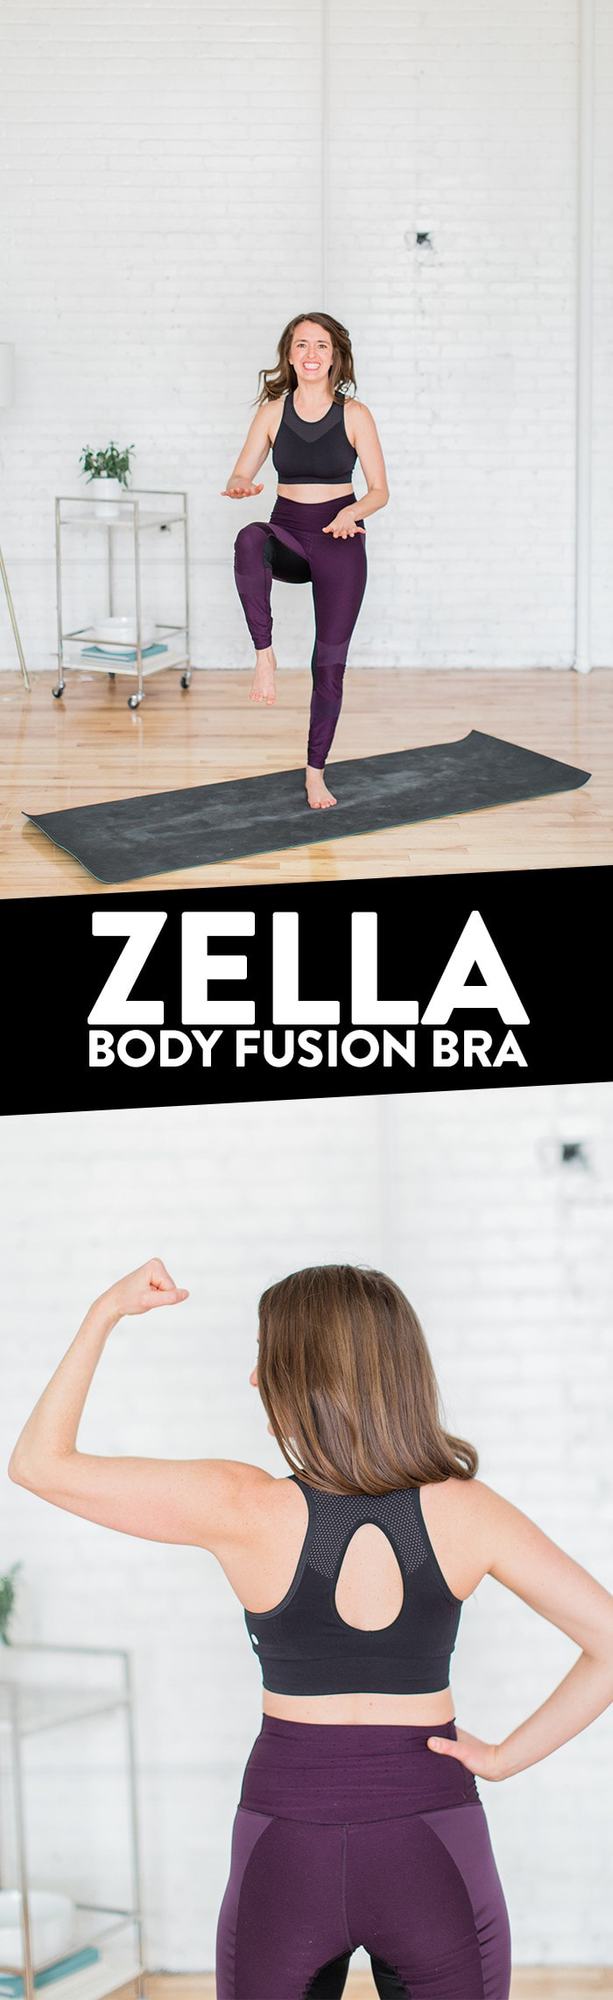 https://fitfoodiefinds.com/wp-content/uploads/2018/04/zella-body-fusion-bra.jpg